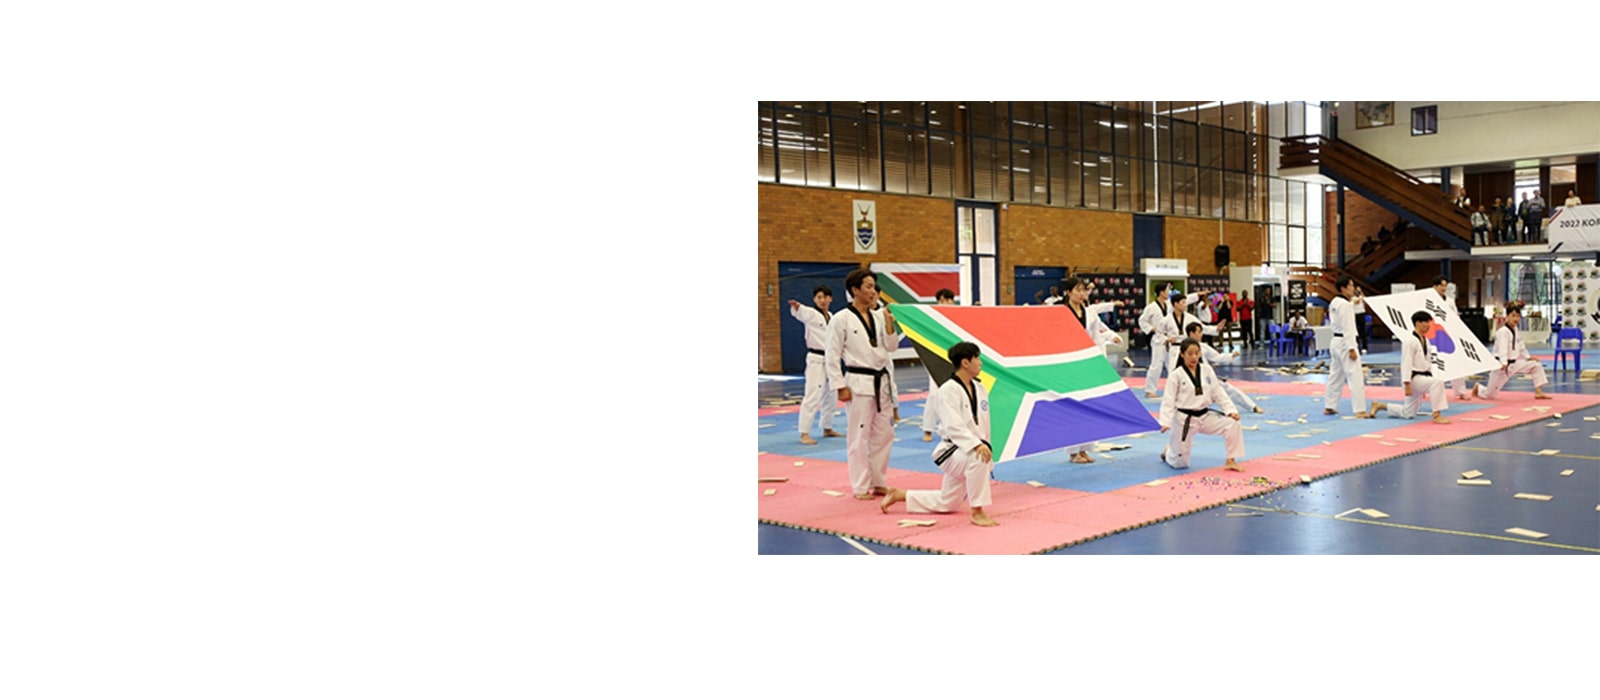 Celebrating the Traditions of Taekwondo in South Africa